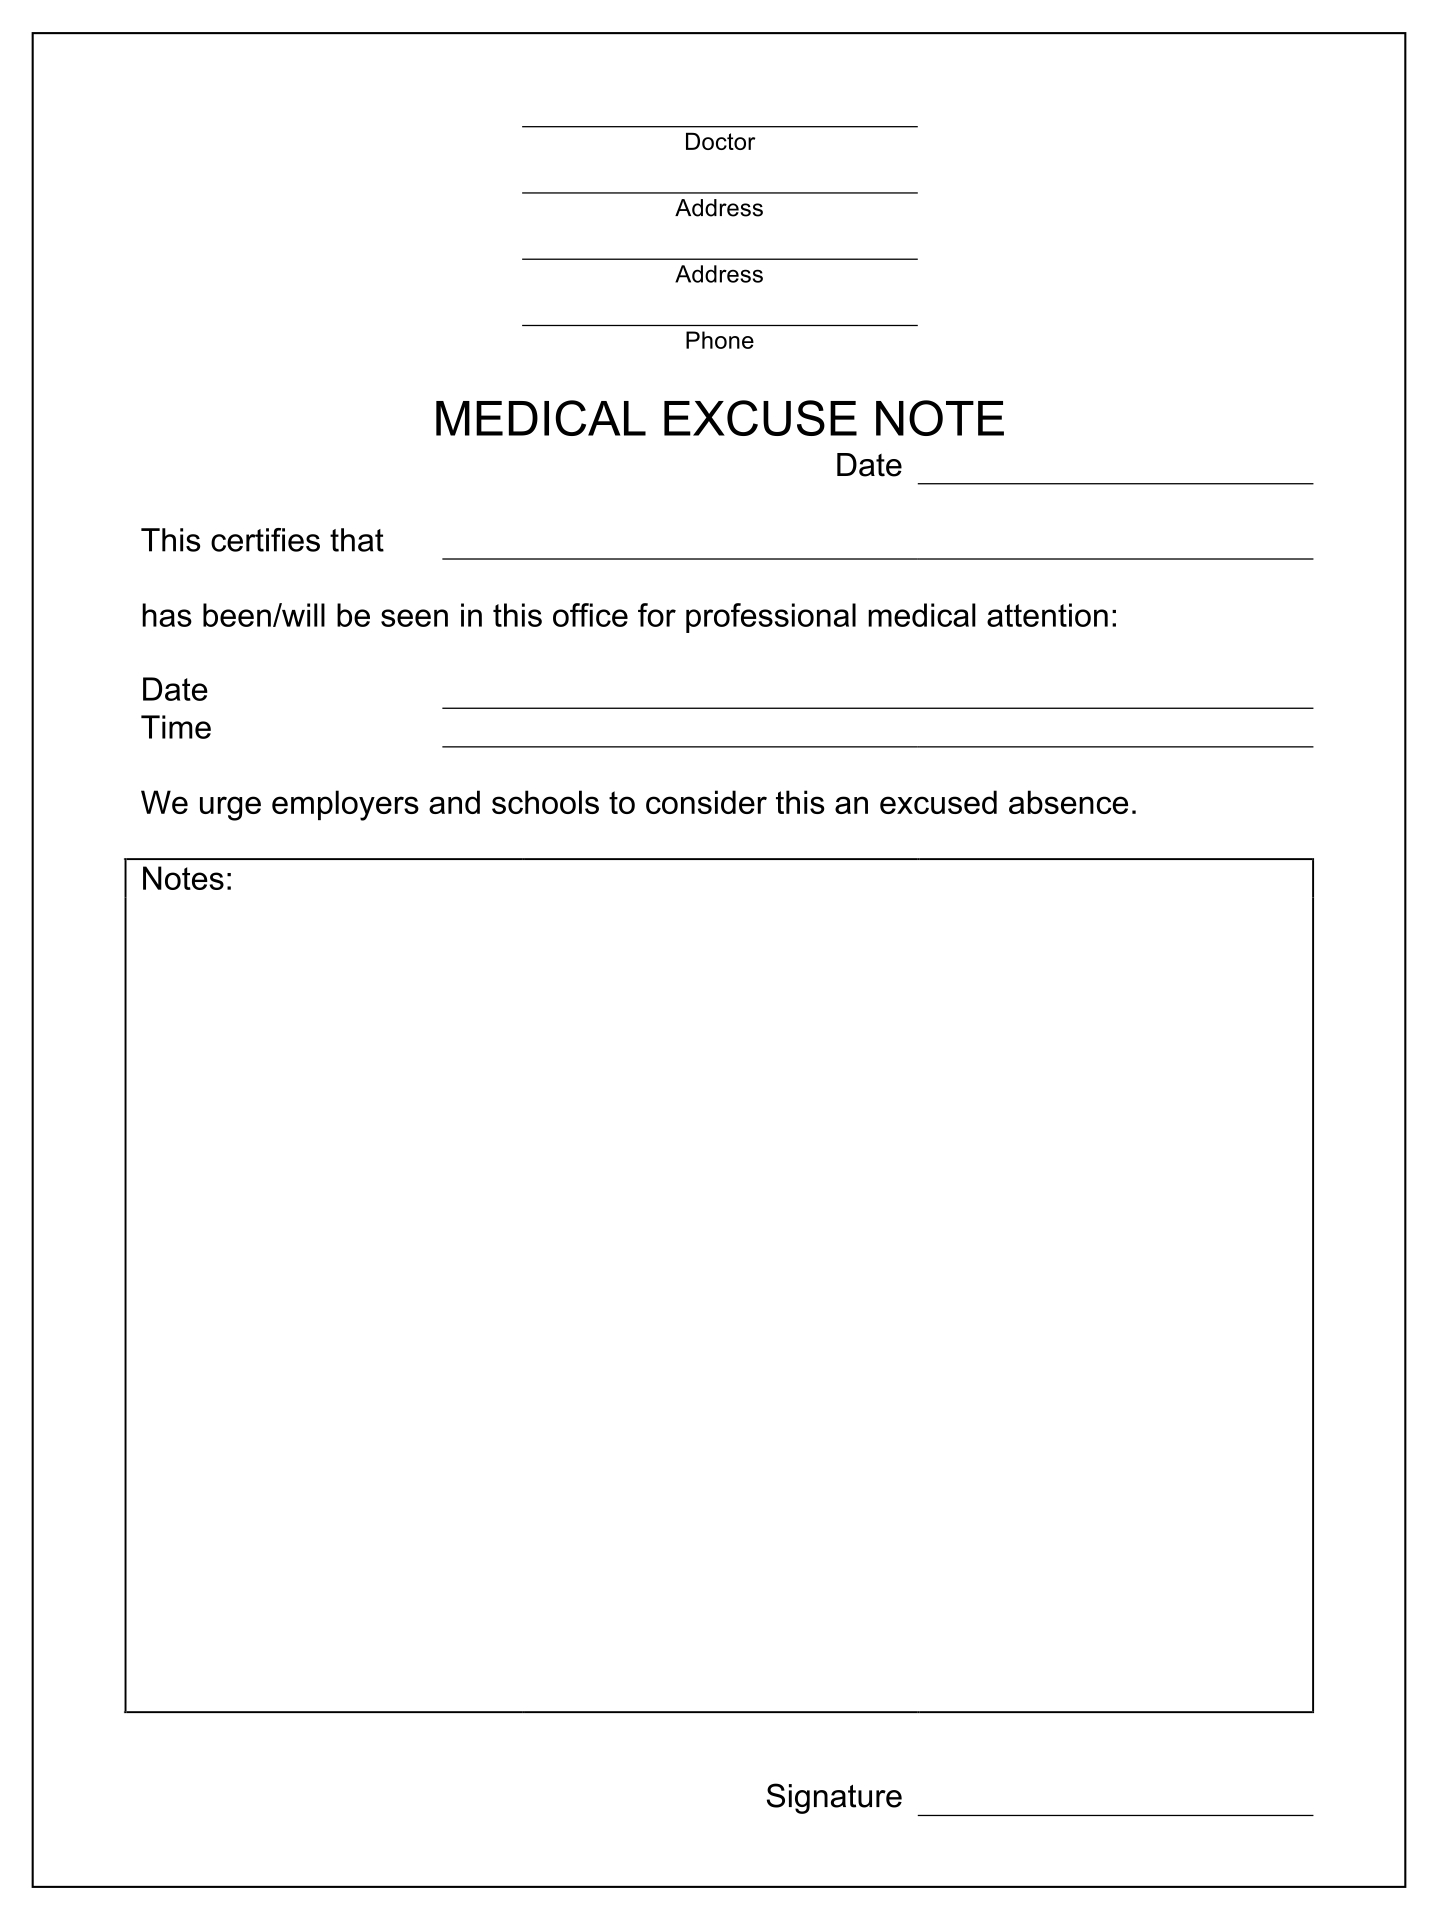 Fake Note Doctors Excuse Template